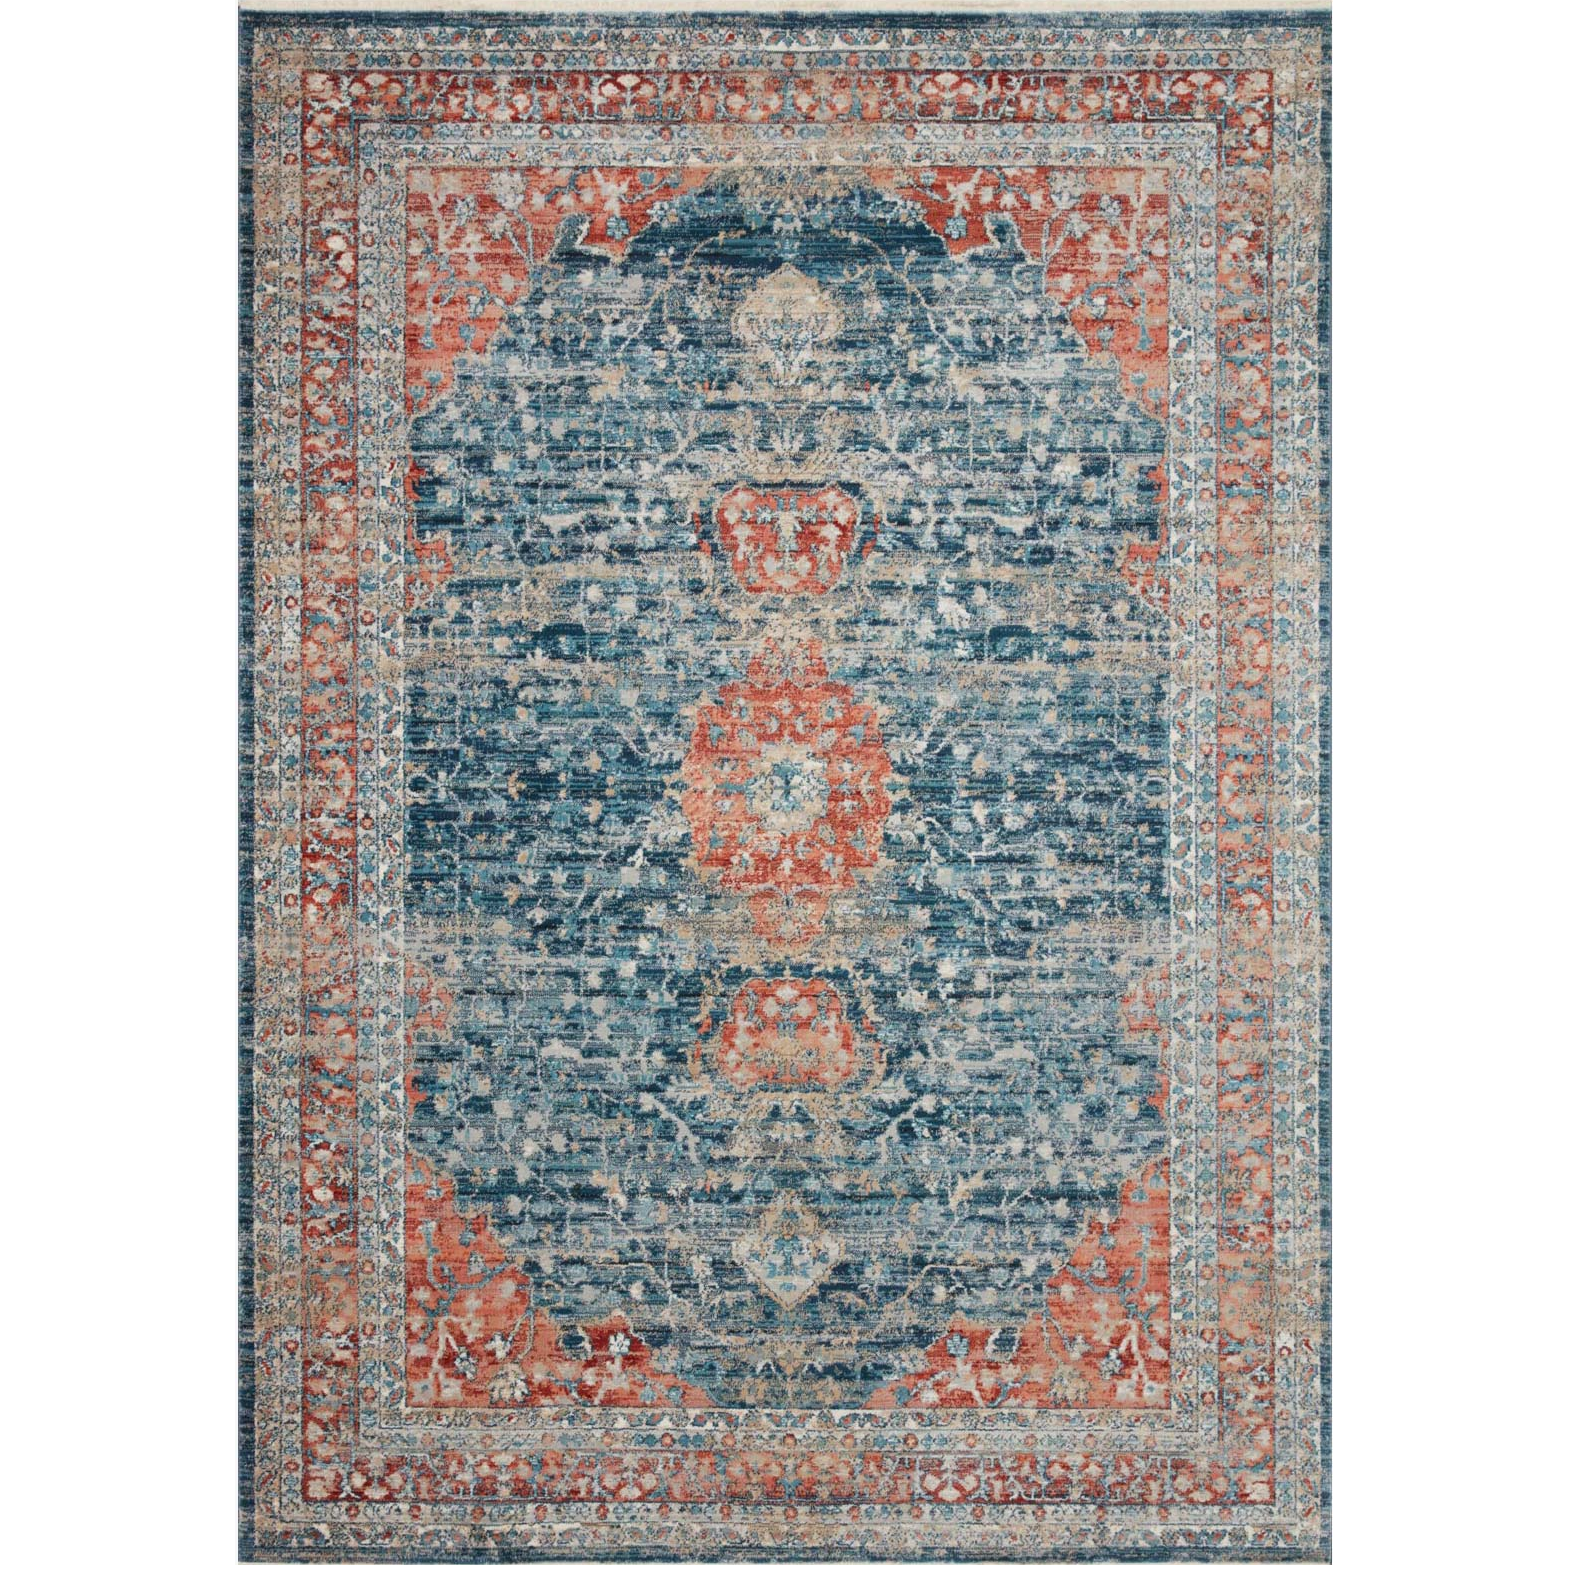 navy and red traditional area rug with floral detail Items range from $89.00 to $1619.00